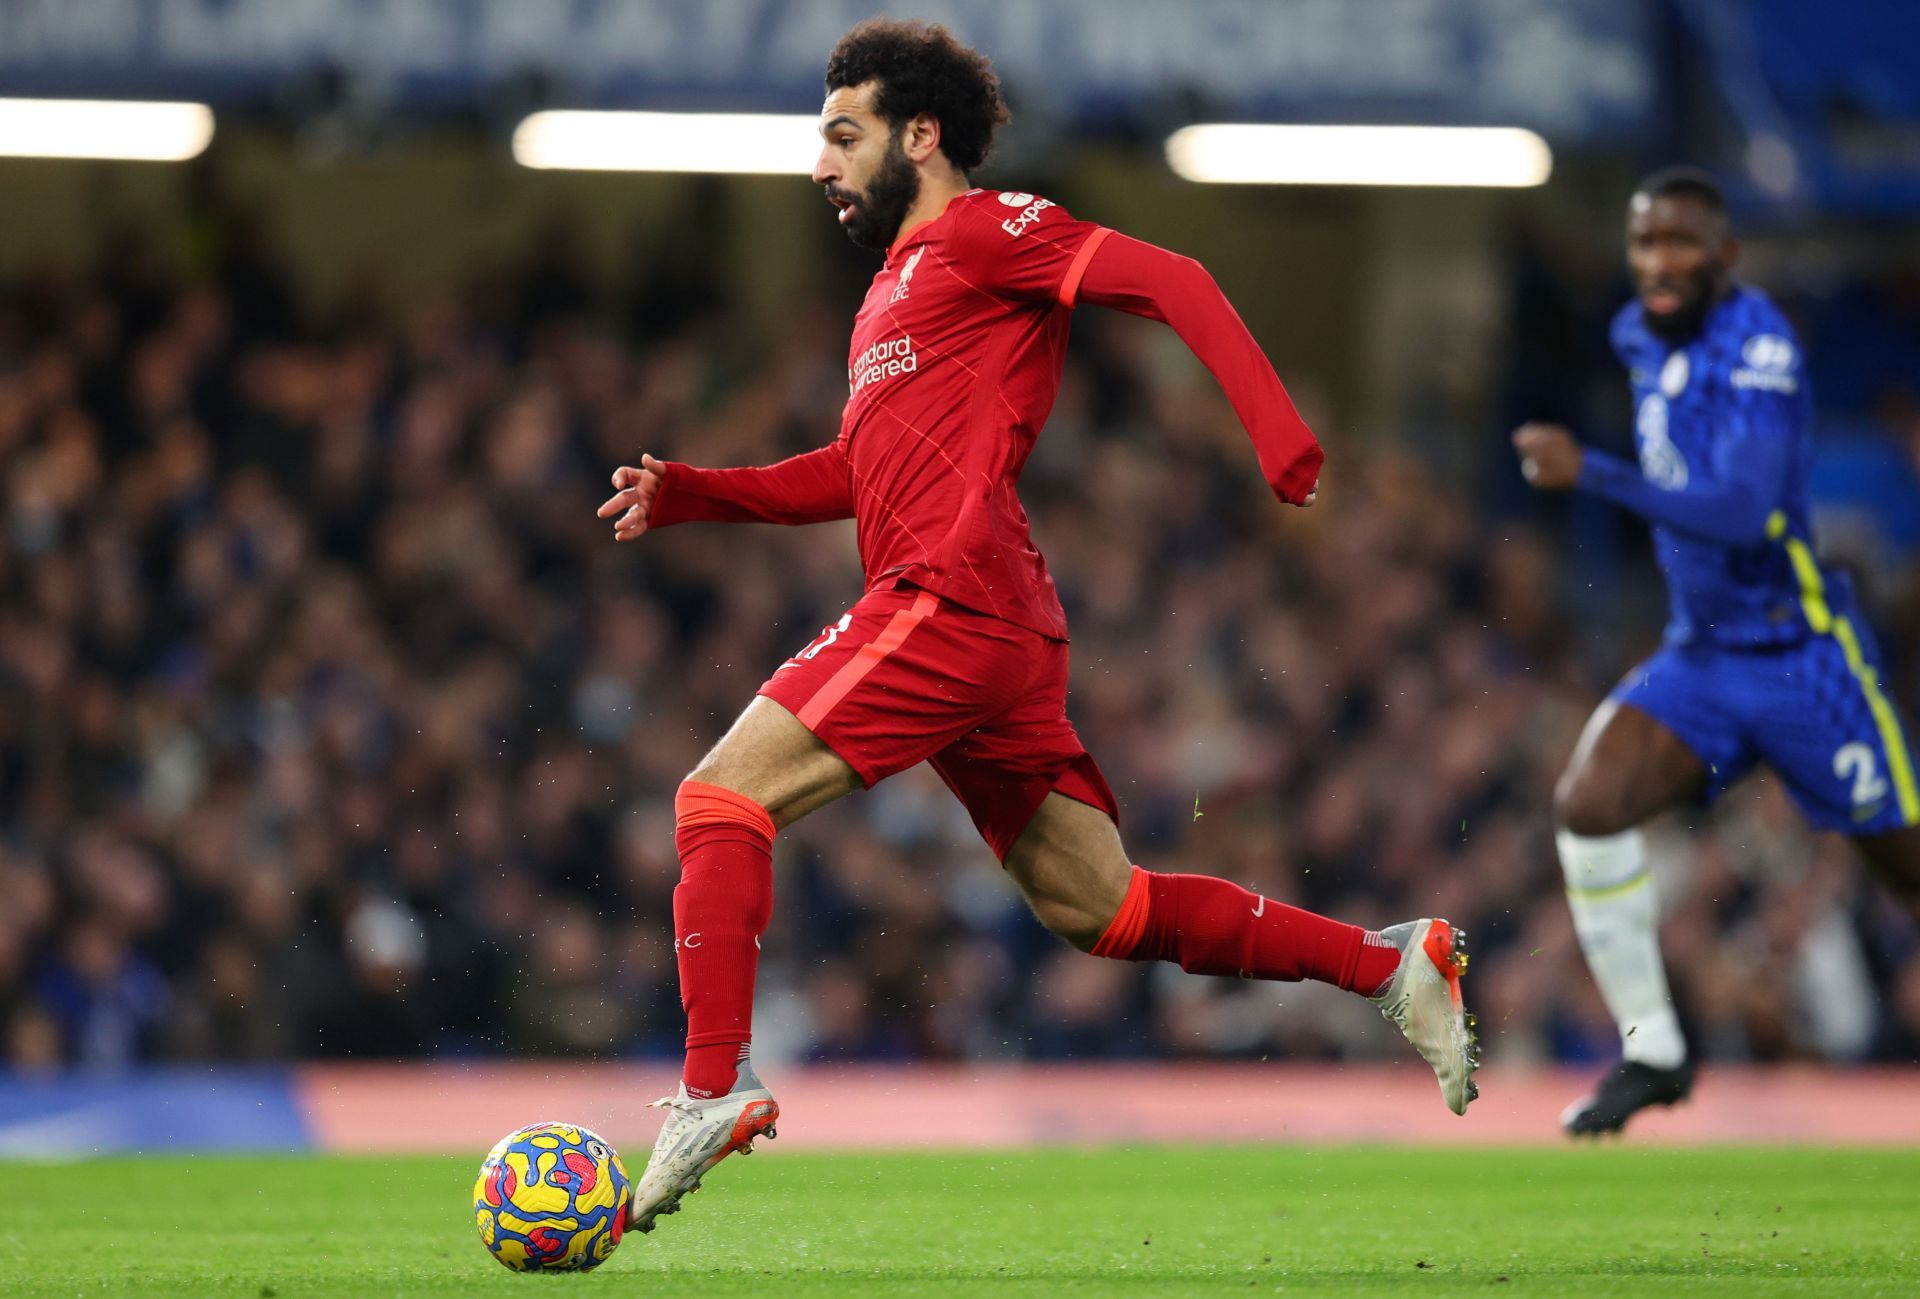 Mohammed Salah is easily the best player in the Premier League right now.